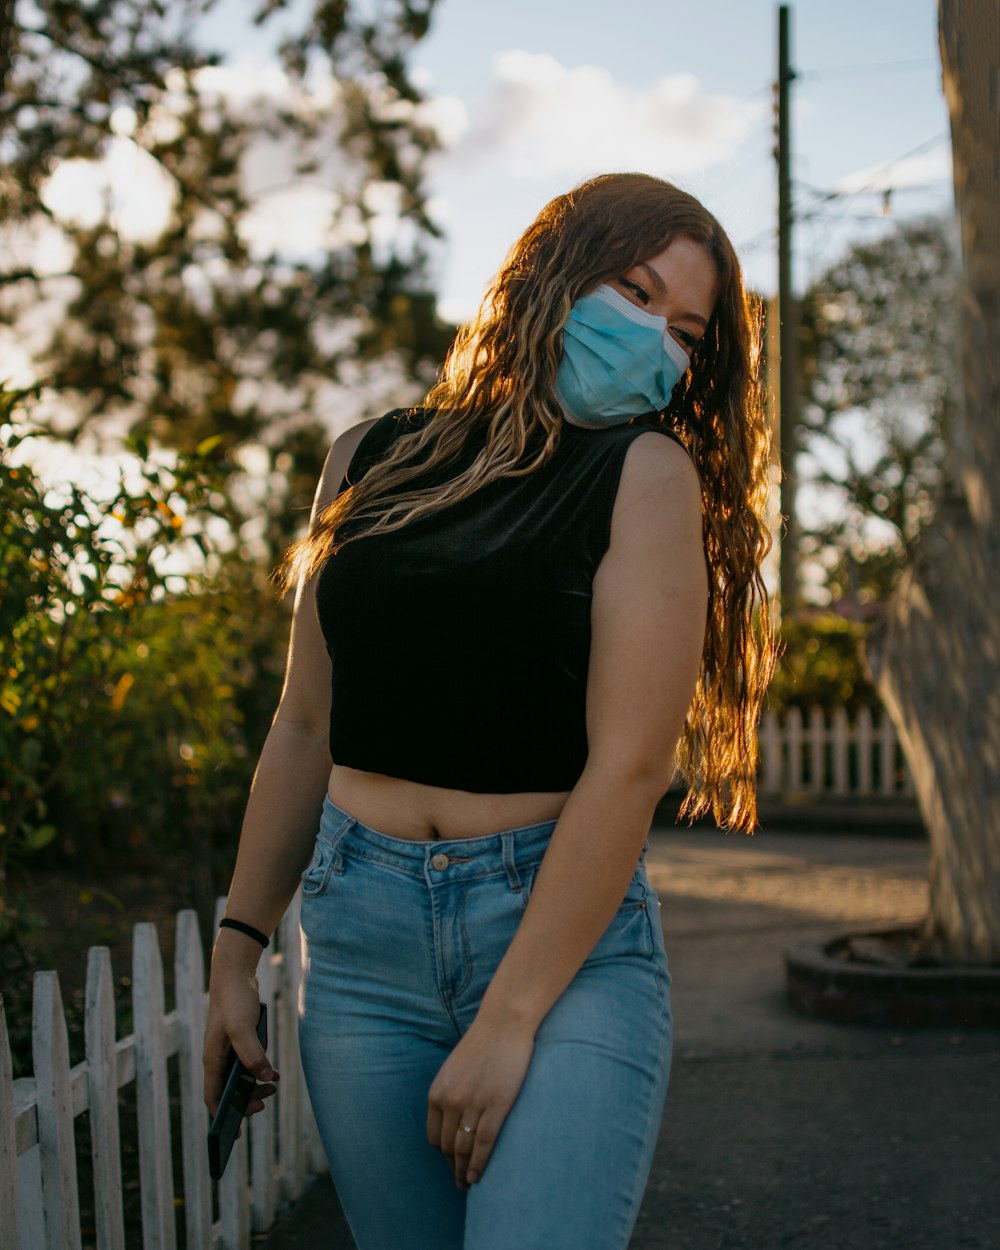 a woman wearing a face mask and jeans